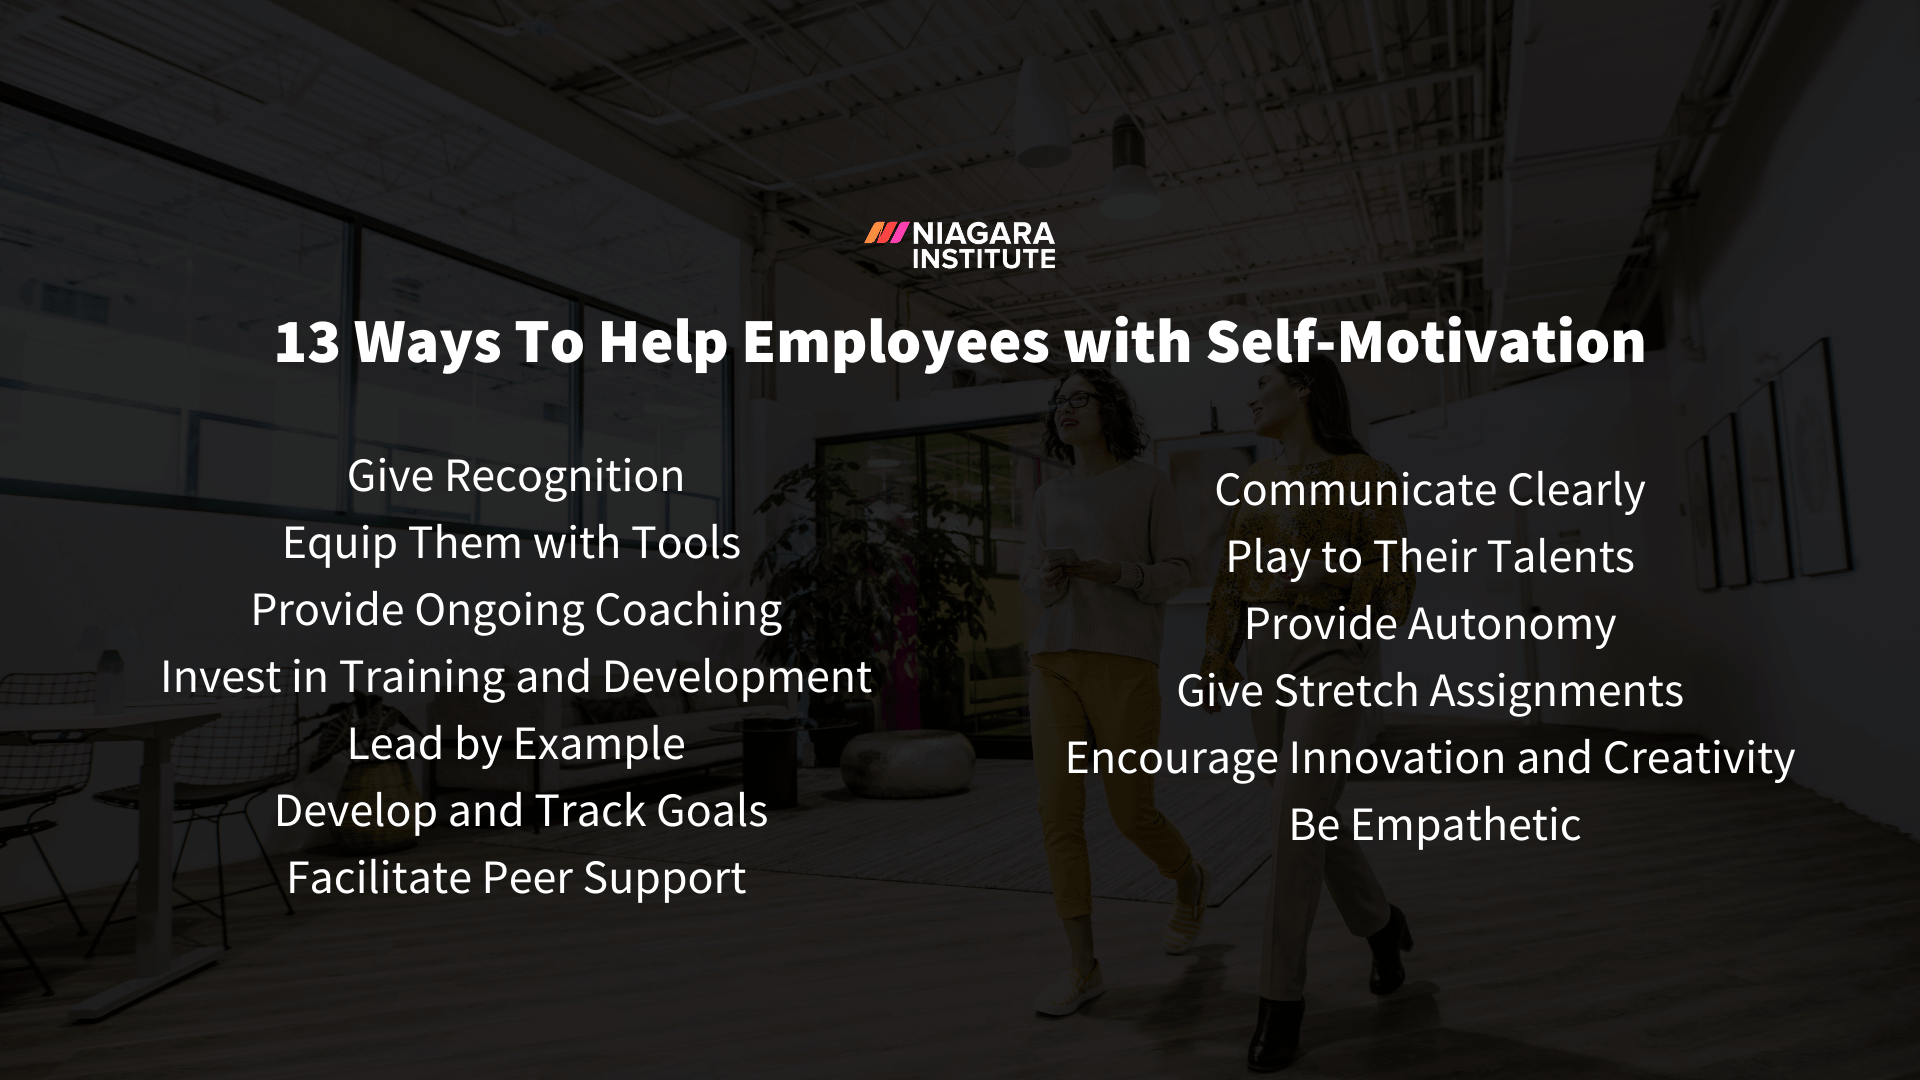 13 Ways To Help Employees with Self-Motivation (2) (1)